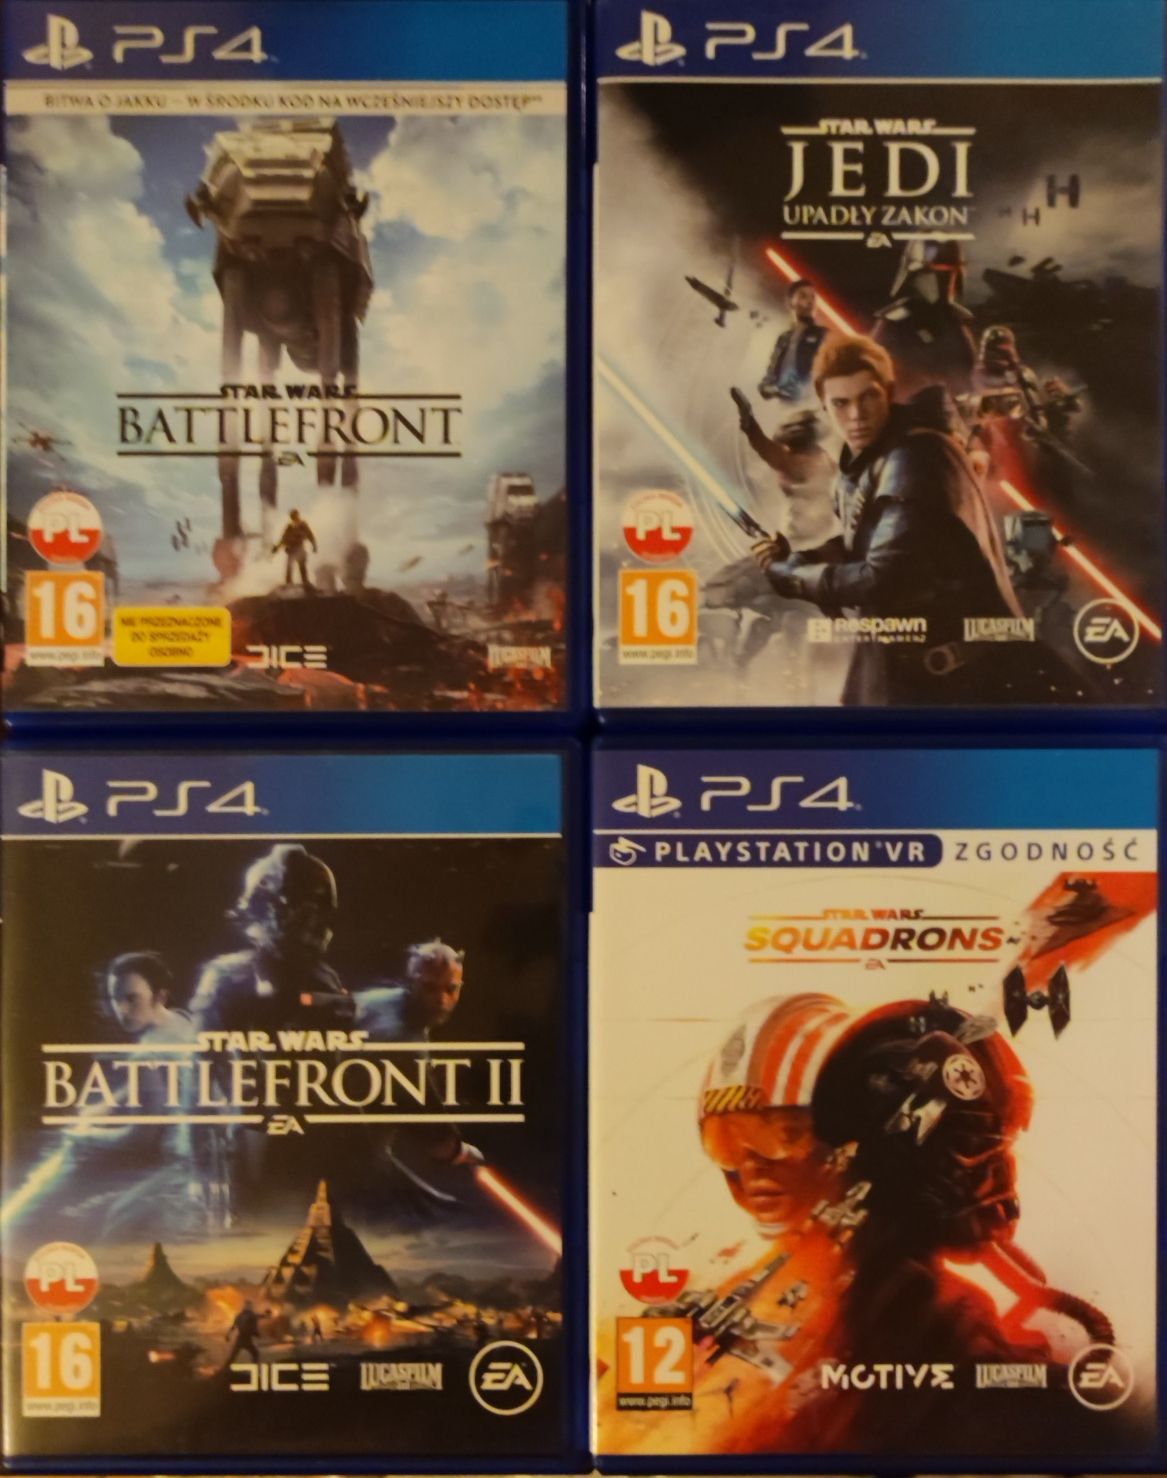 Star Wars | 4 Gry PS4